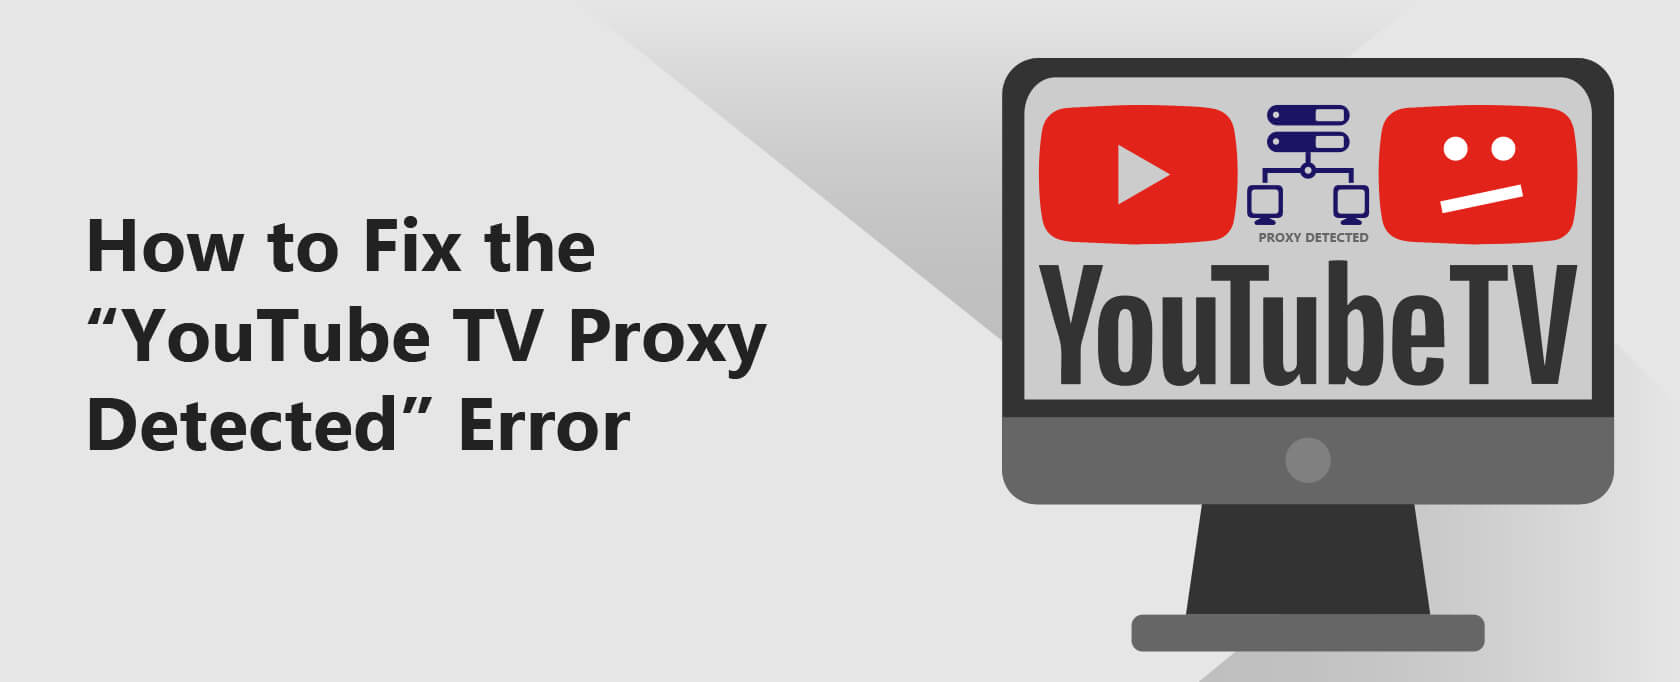 How to Fix the “YouTube TV Proxy Detected” Error